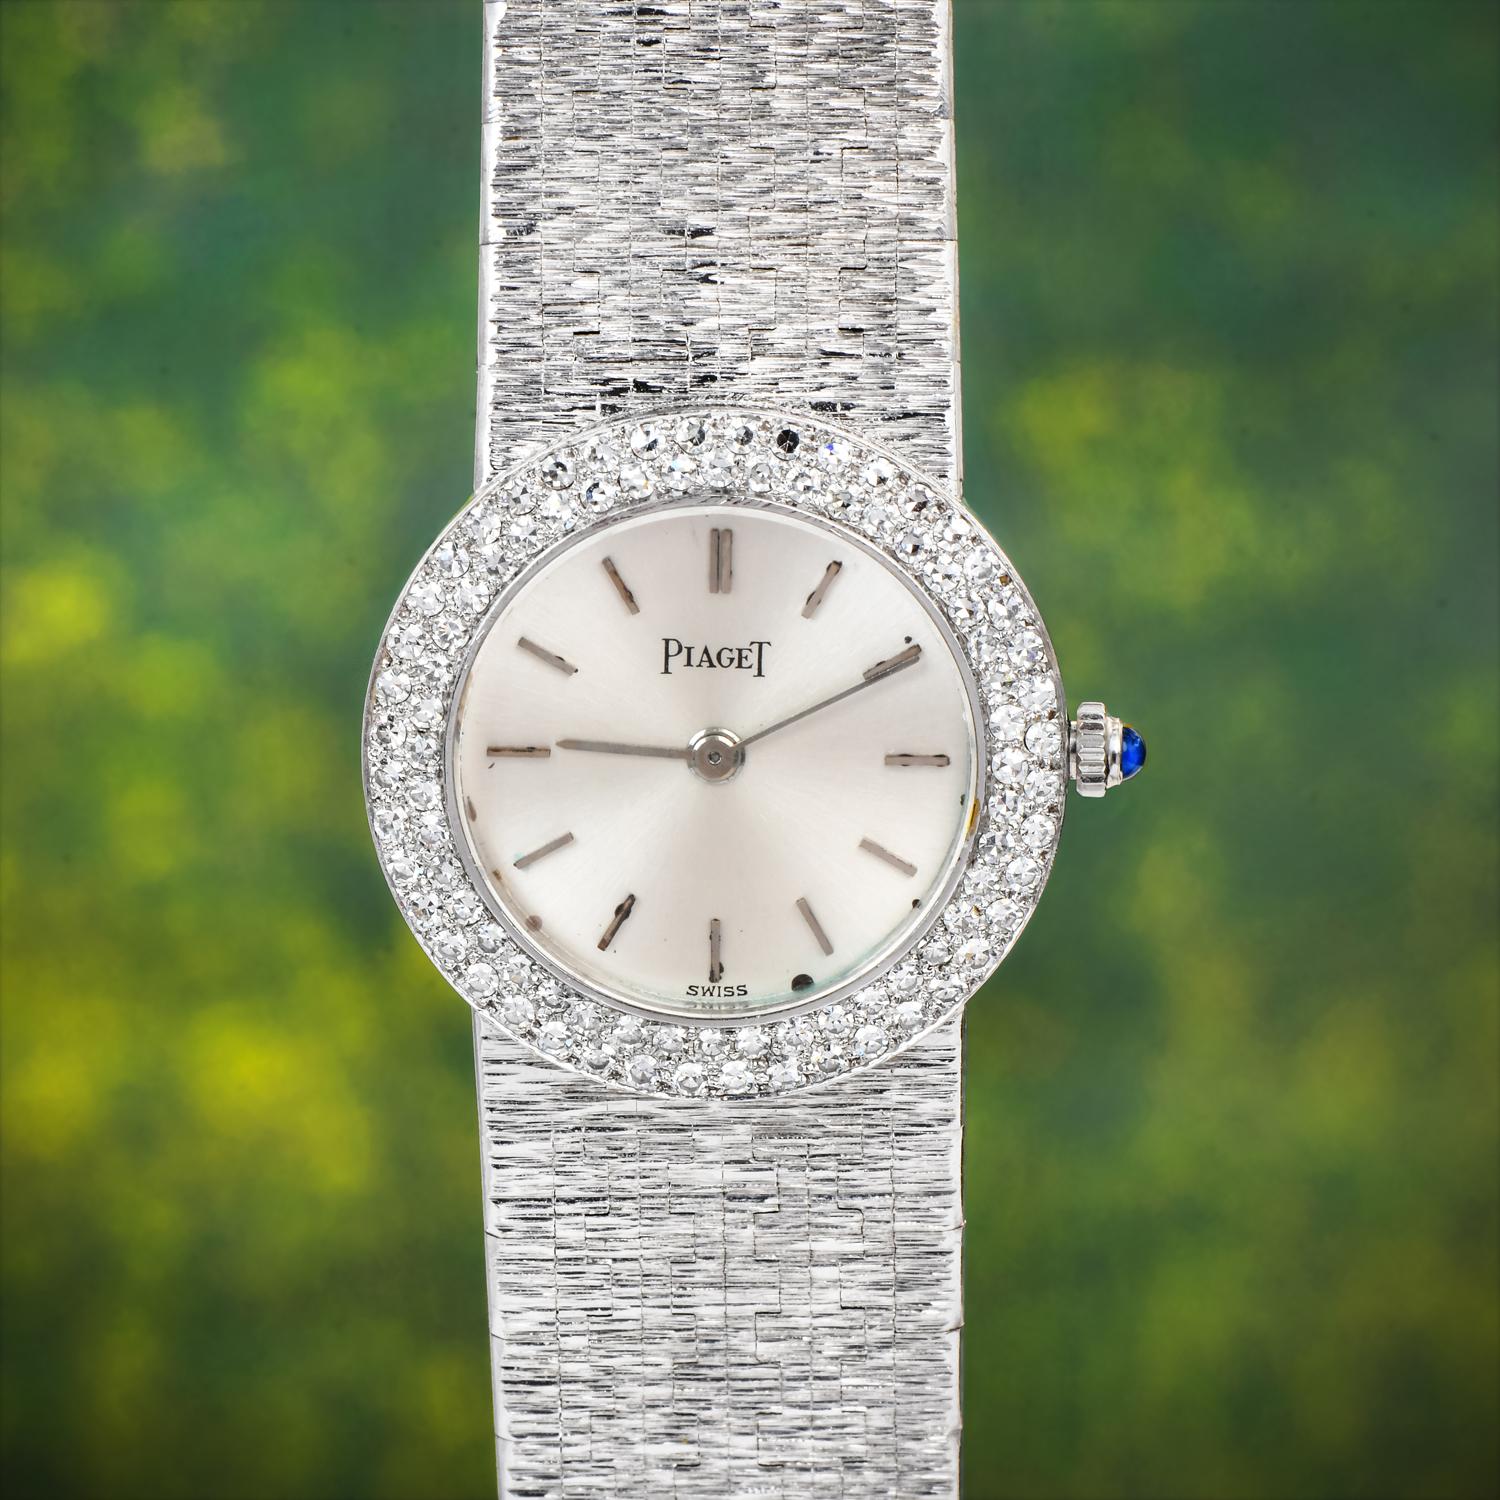 Piaget's timepieces are elegant and stylish made of high-quality materials. This Piaget watch is finely crafted in solid 18K white gold.  Original Piaget mechanical movement, silver dial with silver numerals, and white gold sword hands marking the